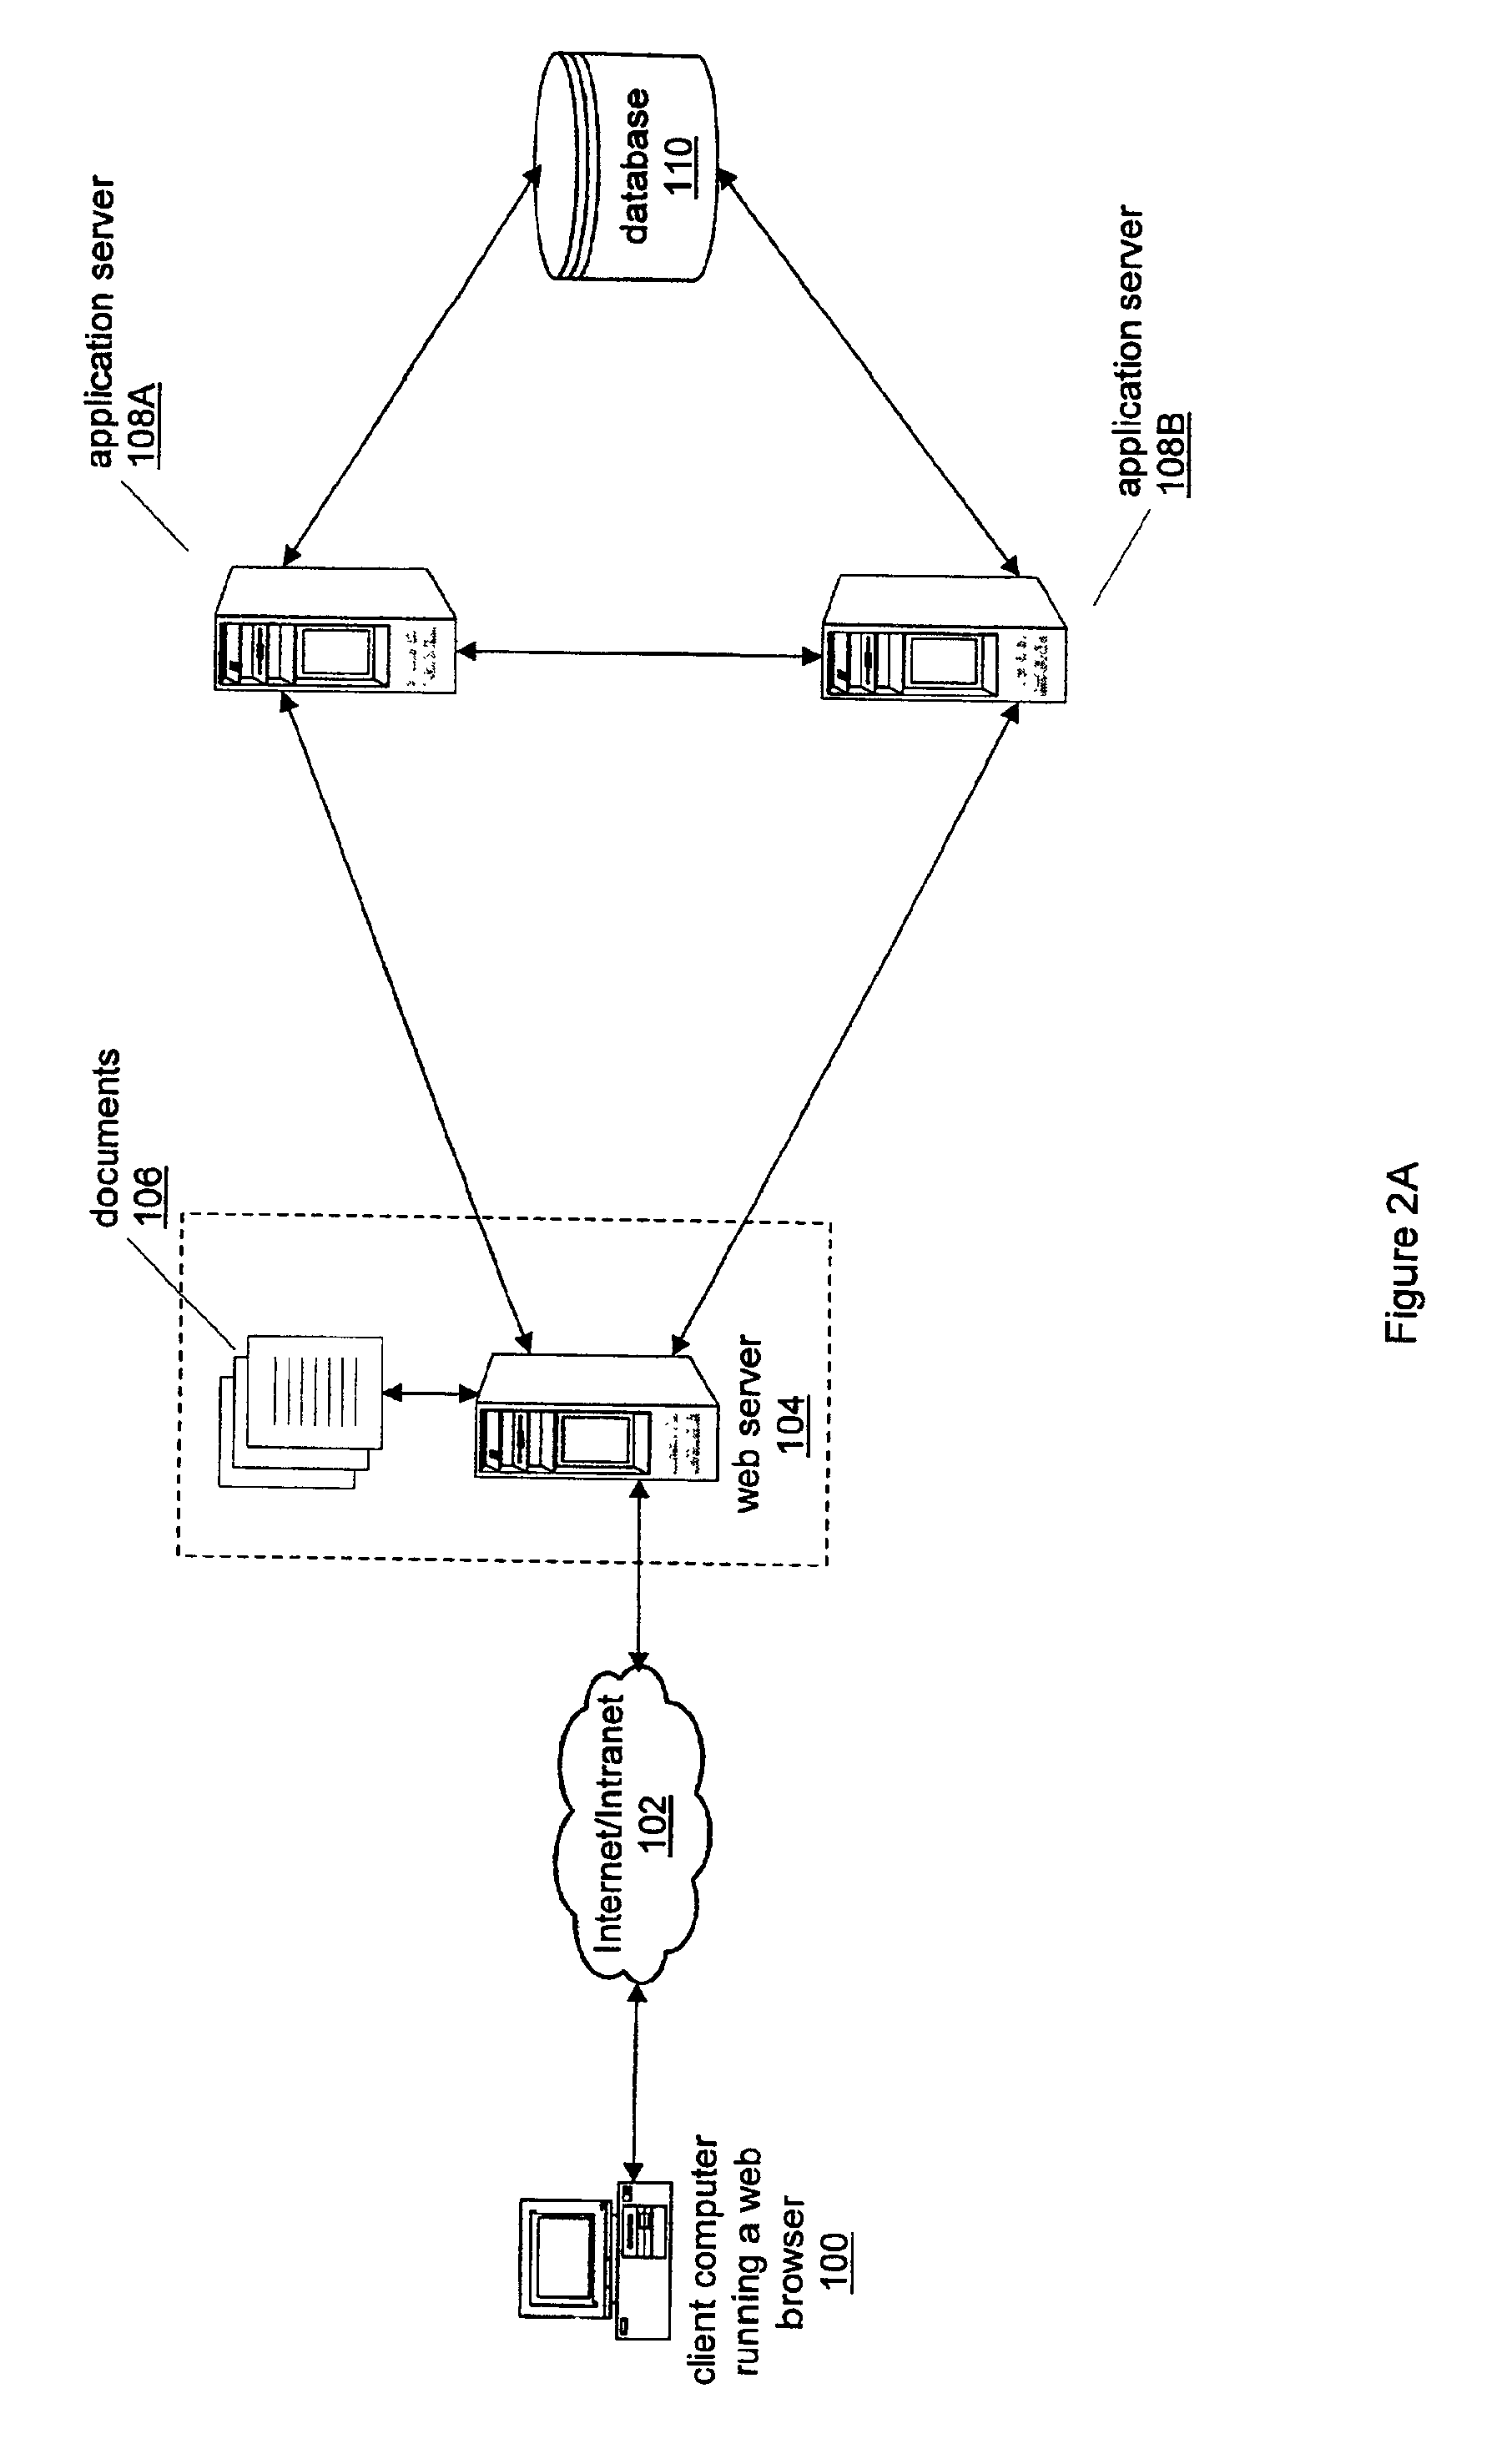 System and method for enabling application server request failover